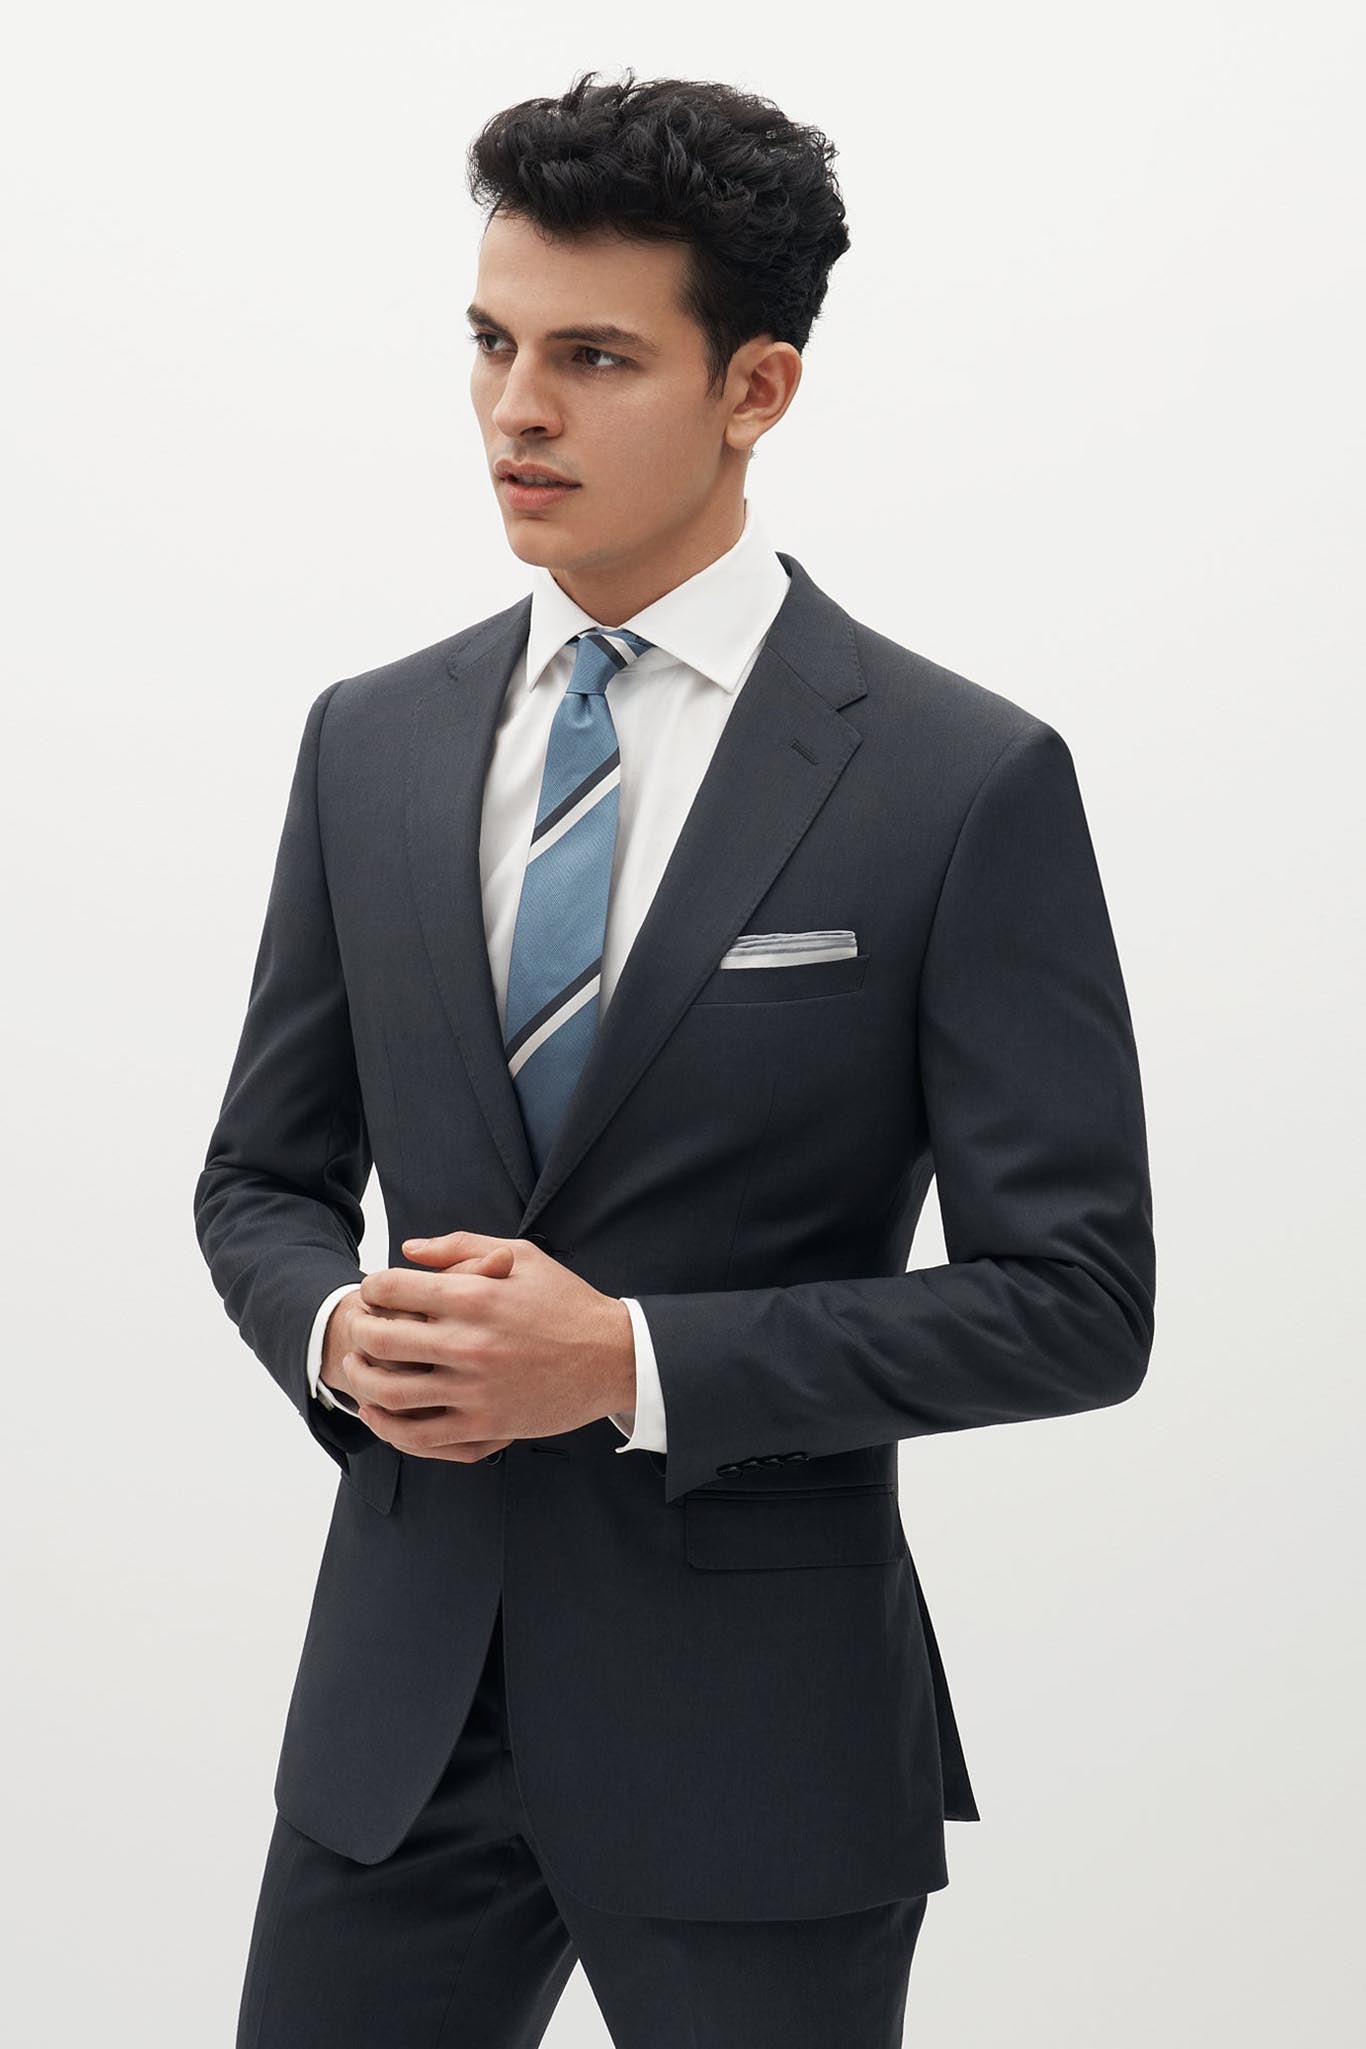 Charcoal Gray Suit by SuitShop